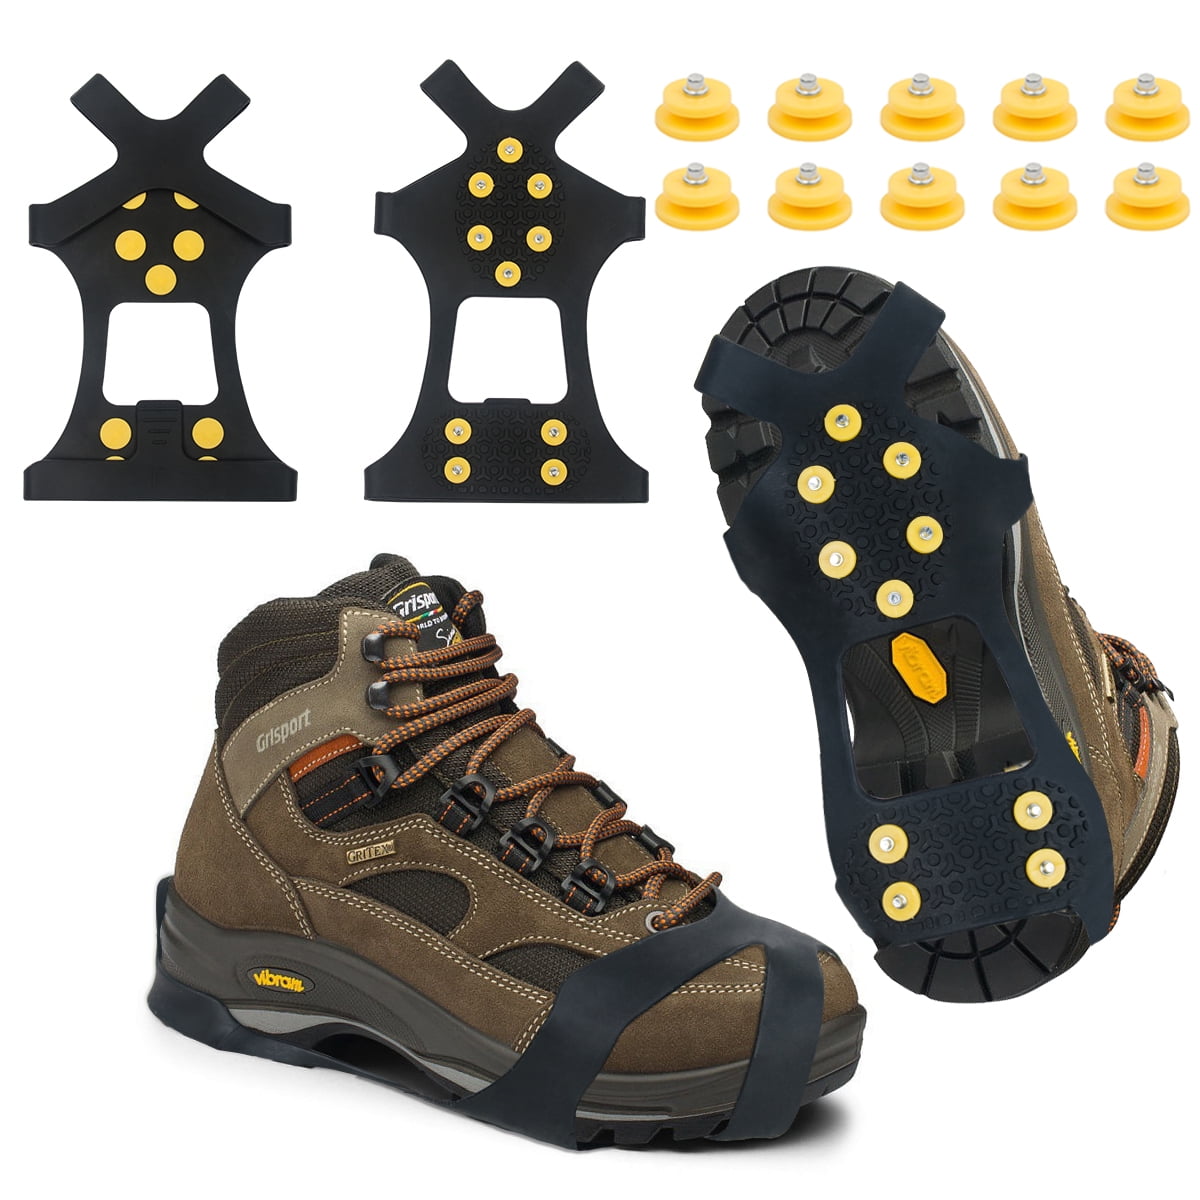 10 Studs Universal Ice No Slip Snow Shoe Spikes Grips Cleats Crampons 1 Pair 